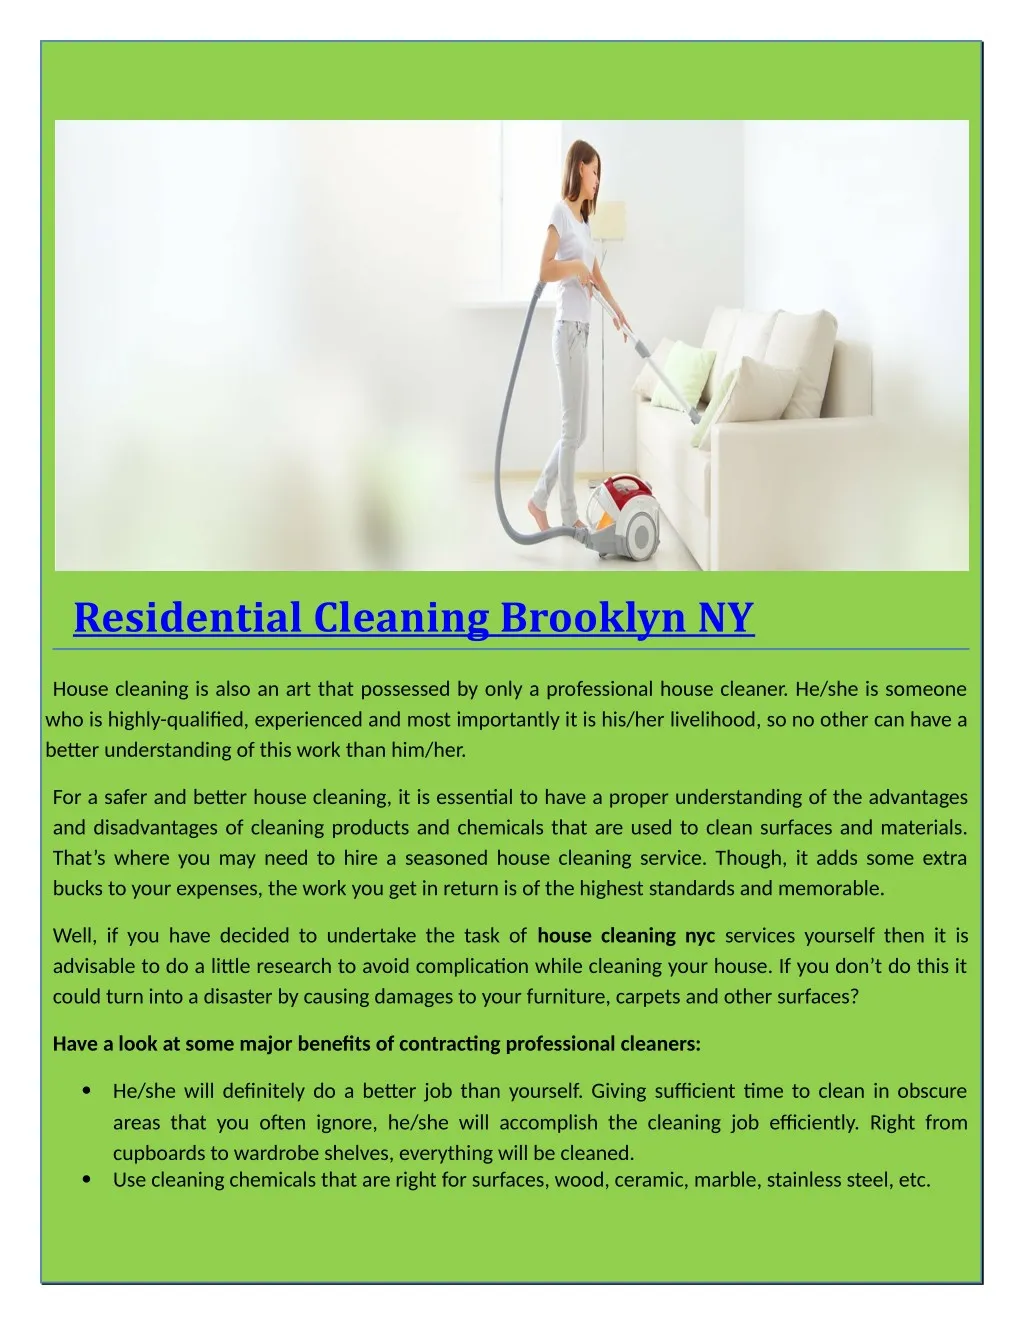 residential cleaning brooklyn ny